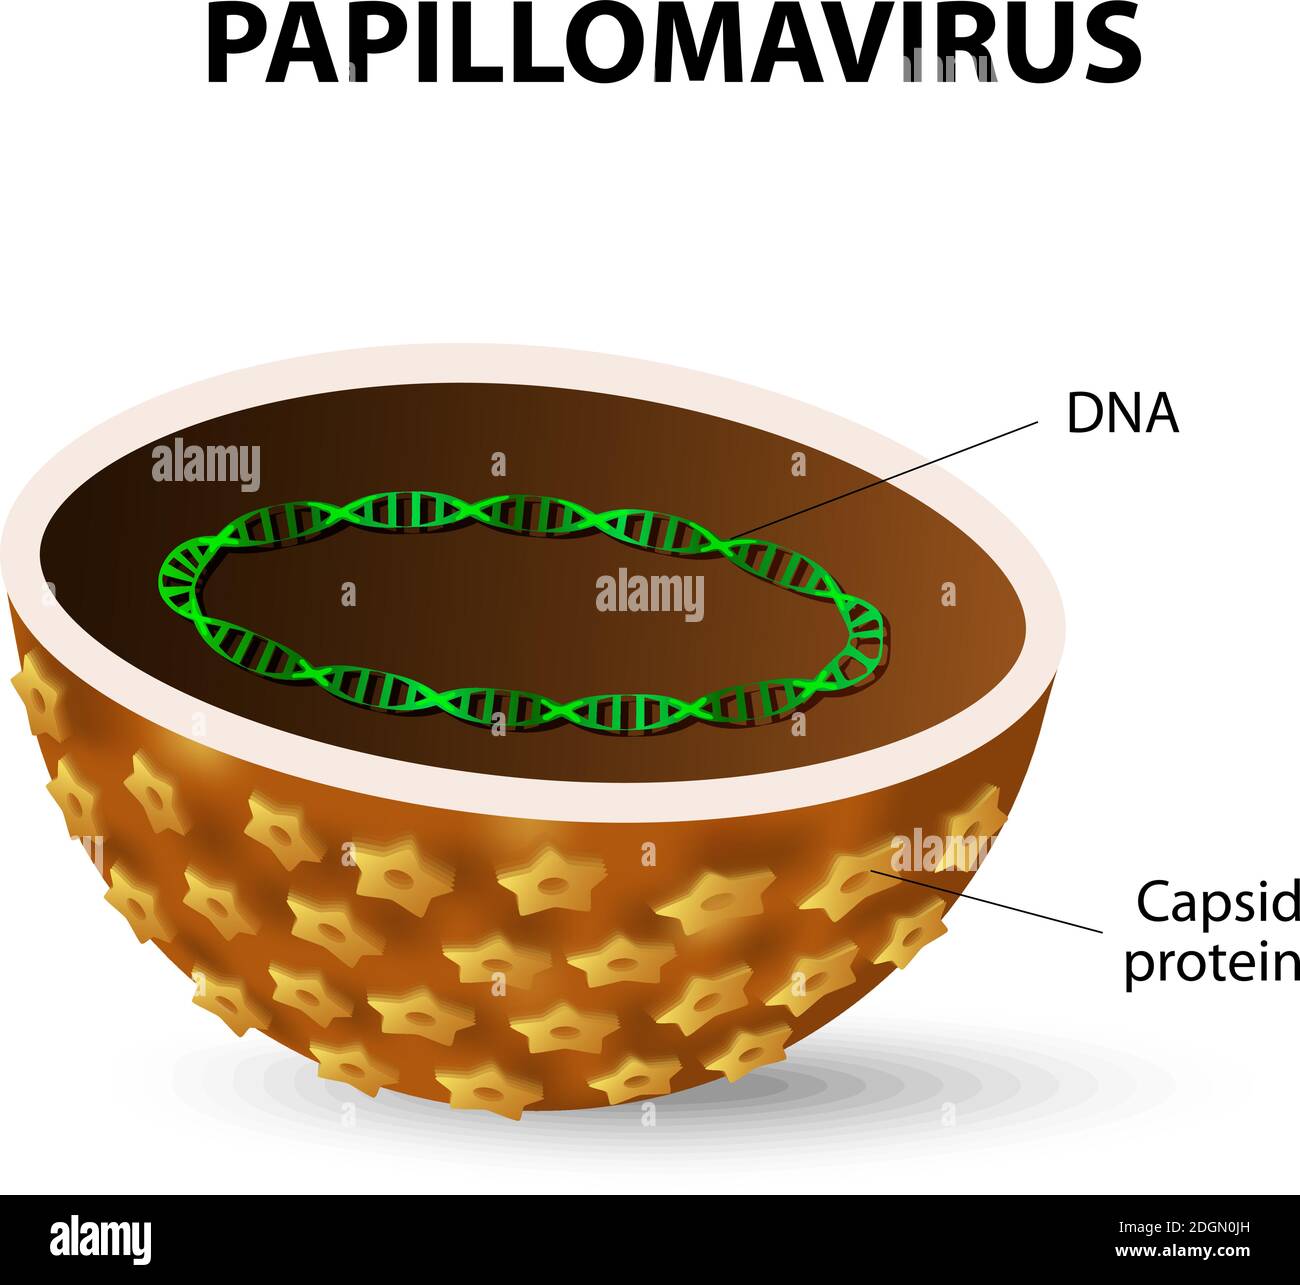 HPV is the cause of cervical cancer in women, warts, and cancers of various organs. Human papilloma virus Stock Vector